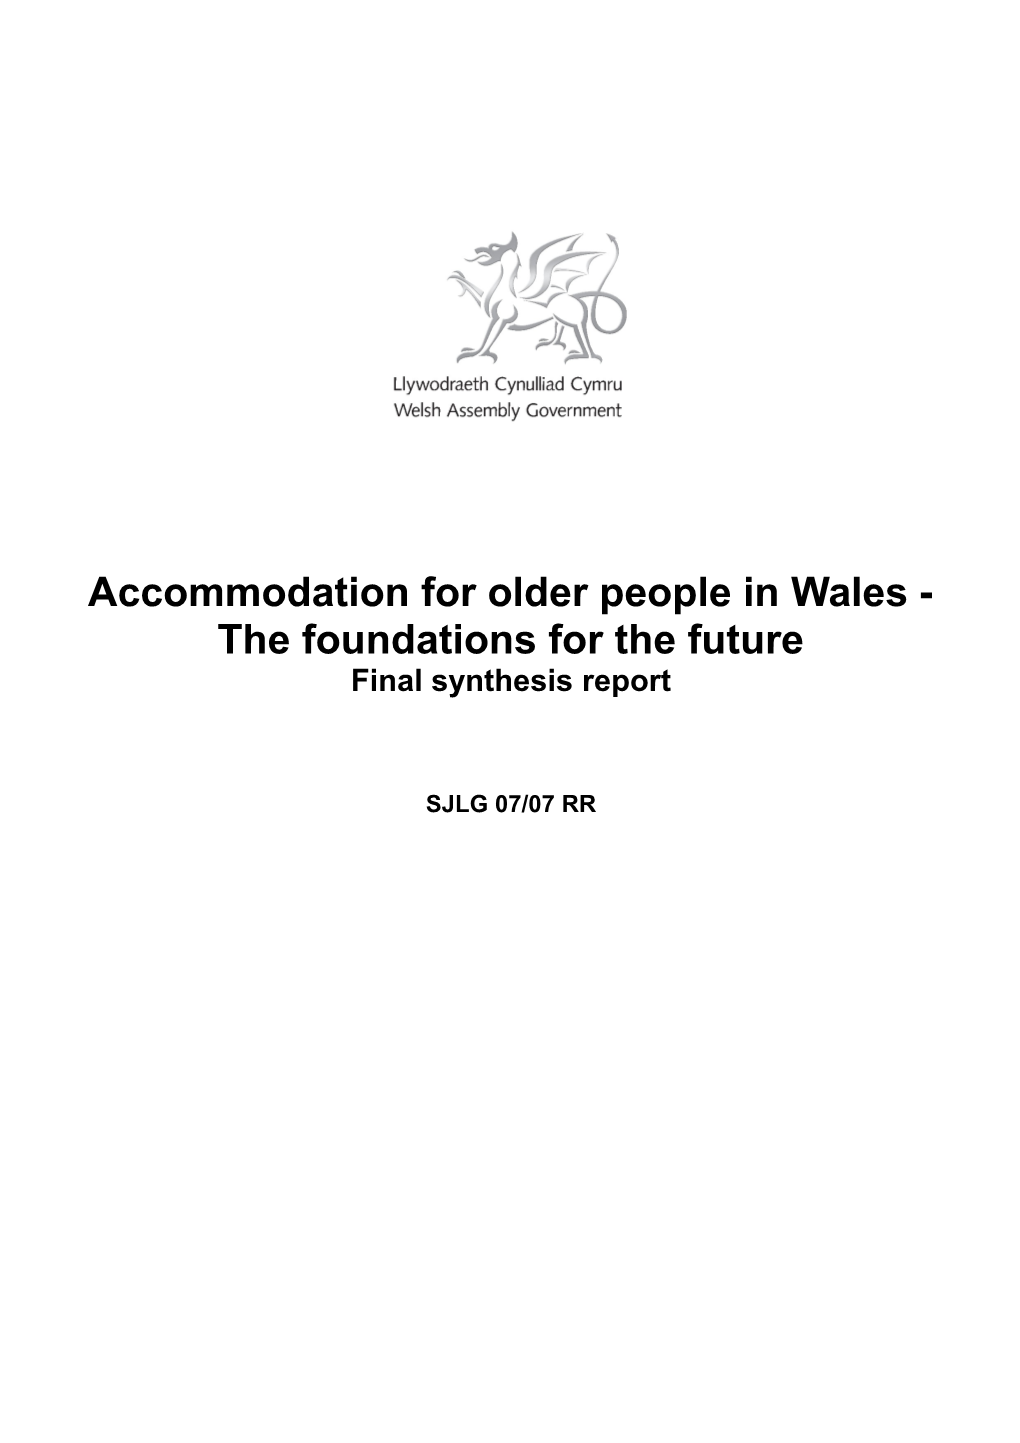 Accommodation for Older People in Wales - the Foundations for the Future